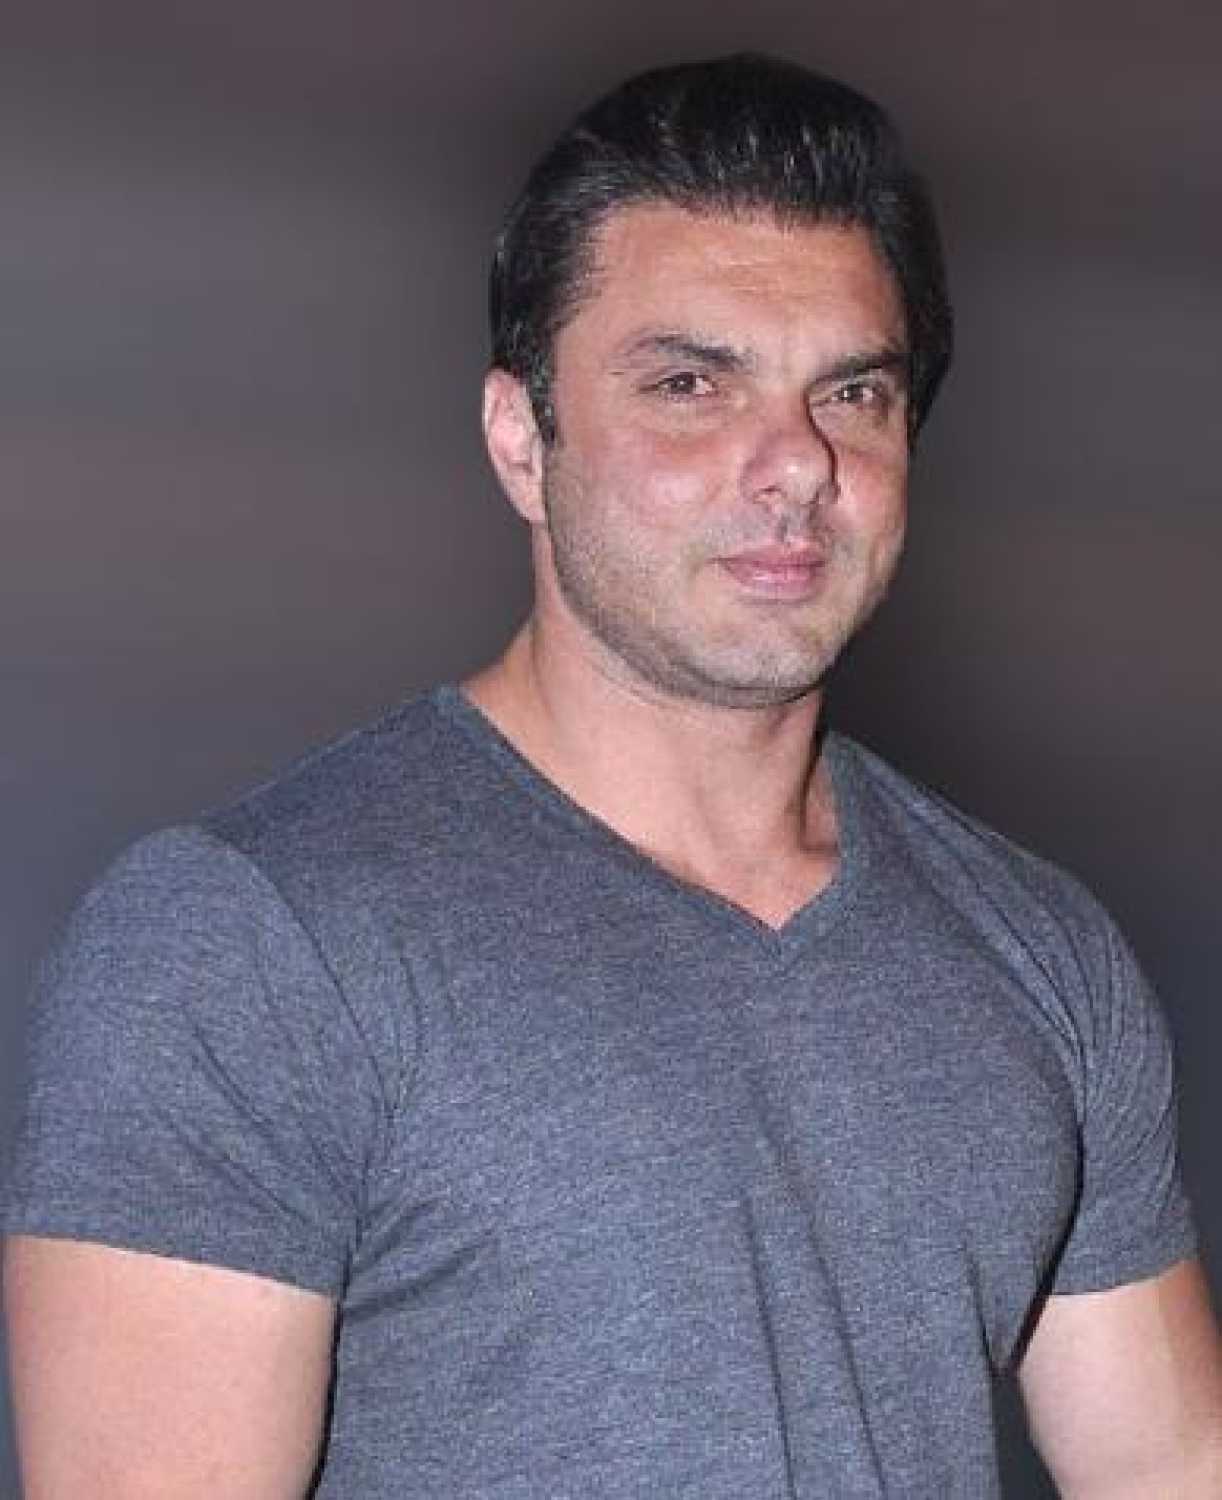 Sohail Khan: The youngest of Salim Khan's sons, Sohail initially carved a niche as a film producer and director. His directorial debut came with the 1997 action thriller 